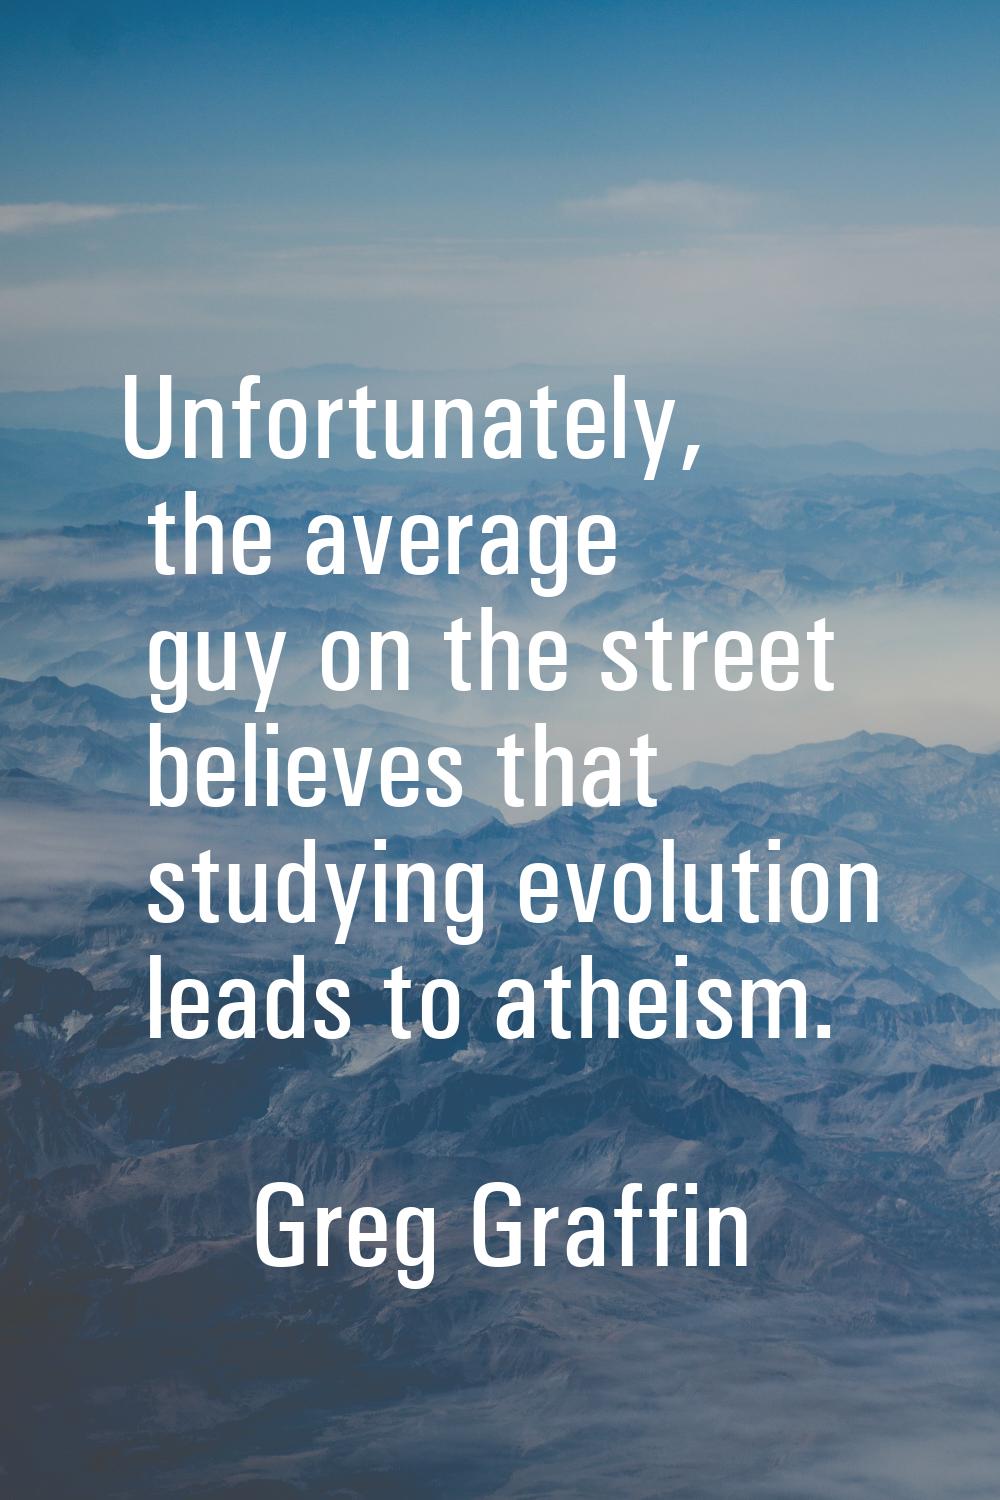 Unfortunately, the average guy on the street believes that studying evolution leads to atheism.